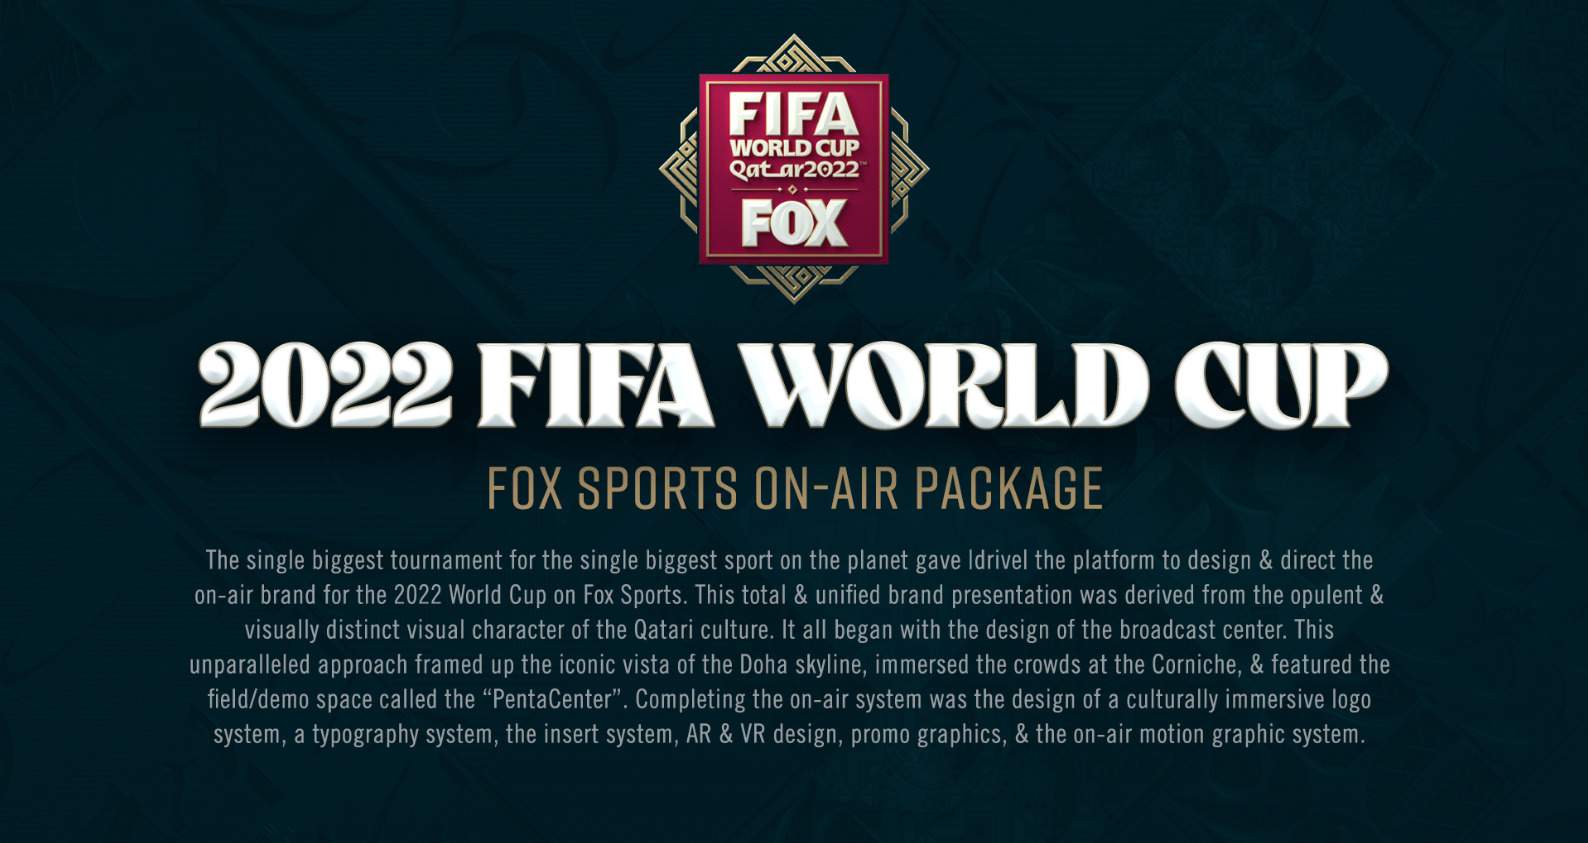 FIFA World Cup 2022 on FOX Sports On-Air Package